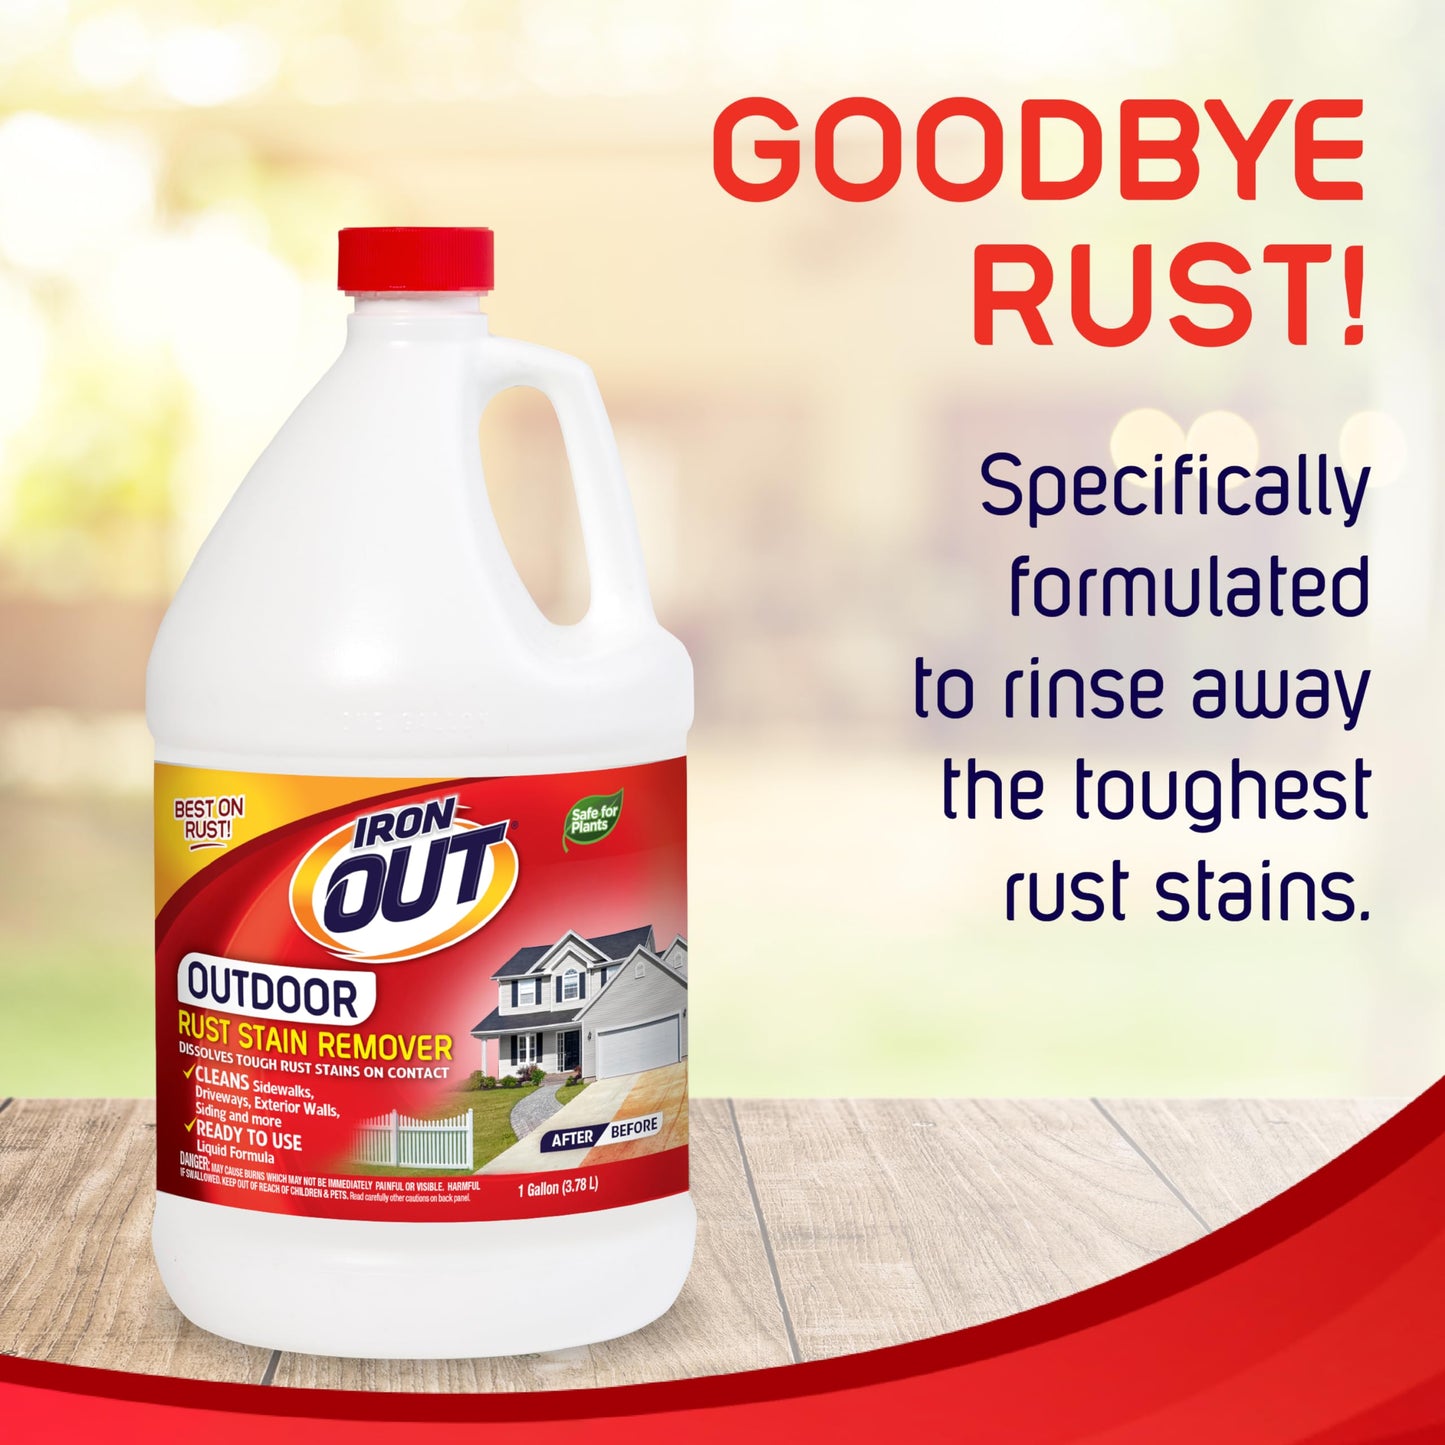 Iron OUT Liquid Rust Stain Remover, Pre-mixed, Quickly Removes Rust Stains from Concrete, Vinyl and Other Outdoor Surfaces, No Scrubbing, Safe to